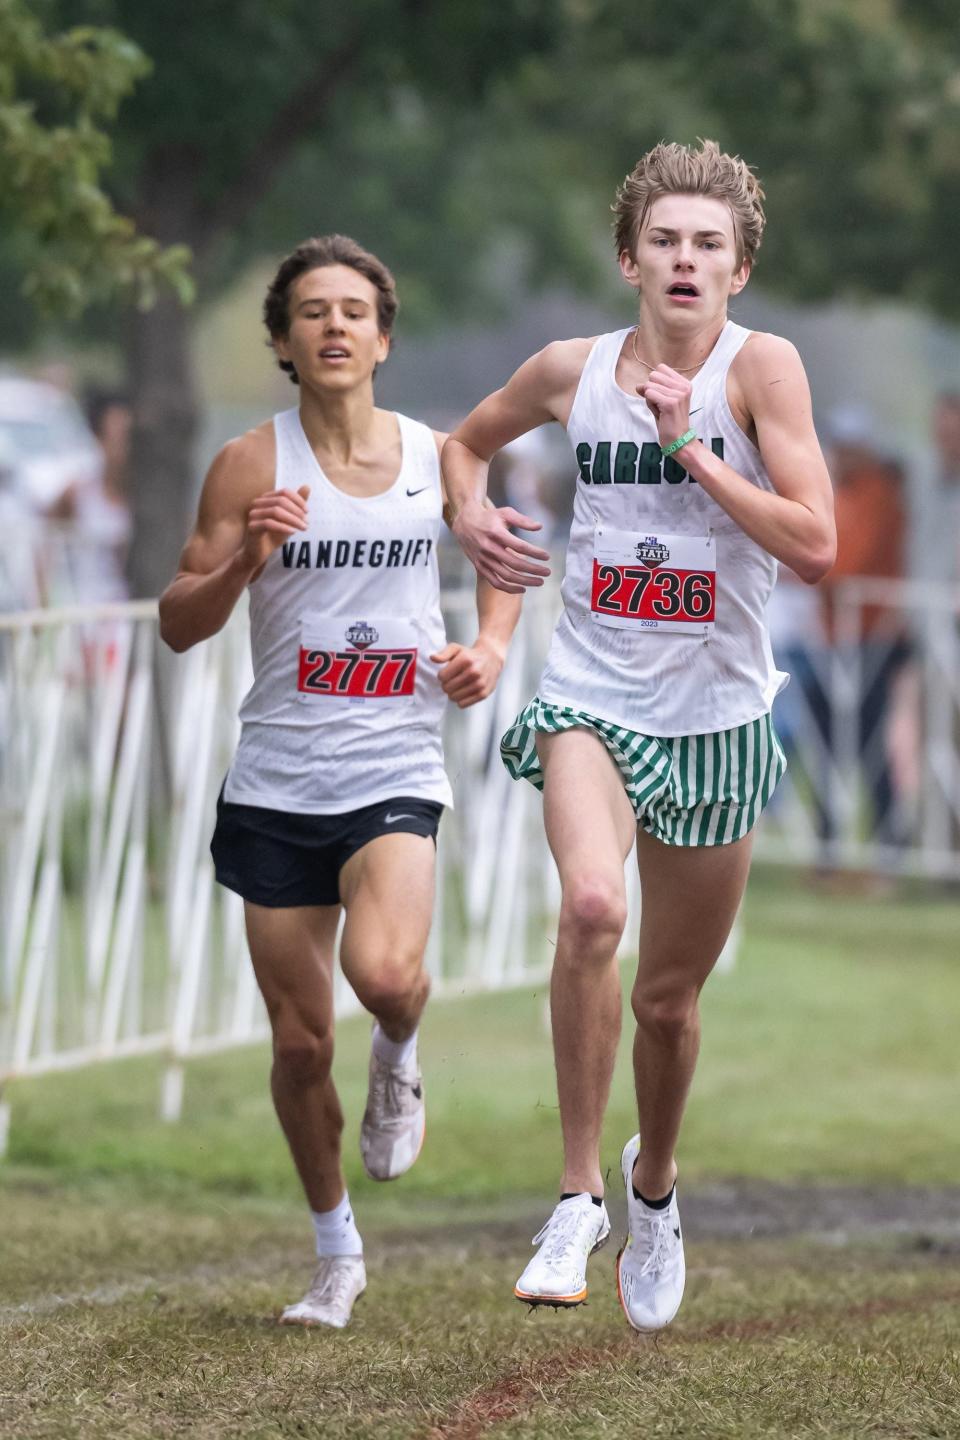 Caden Leonard from Southlake Carroll churns to victory with Vandegrift's Hudson Haley right behind him Saturday in the Class 6A boys race at the UIL state cross-country championships.